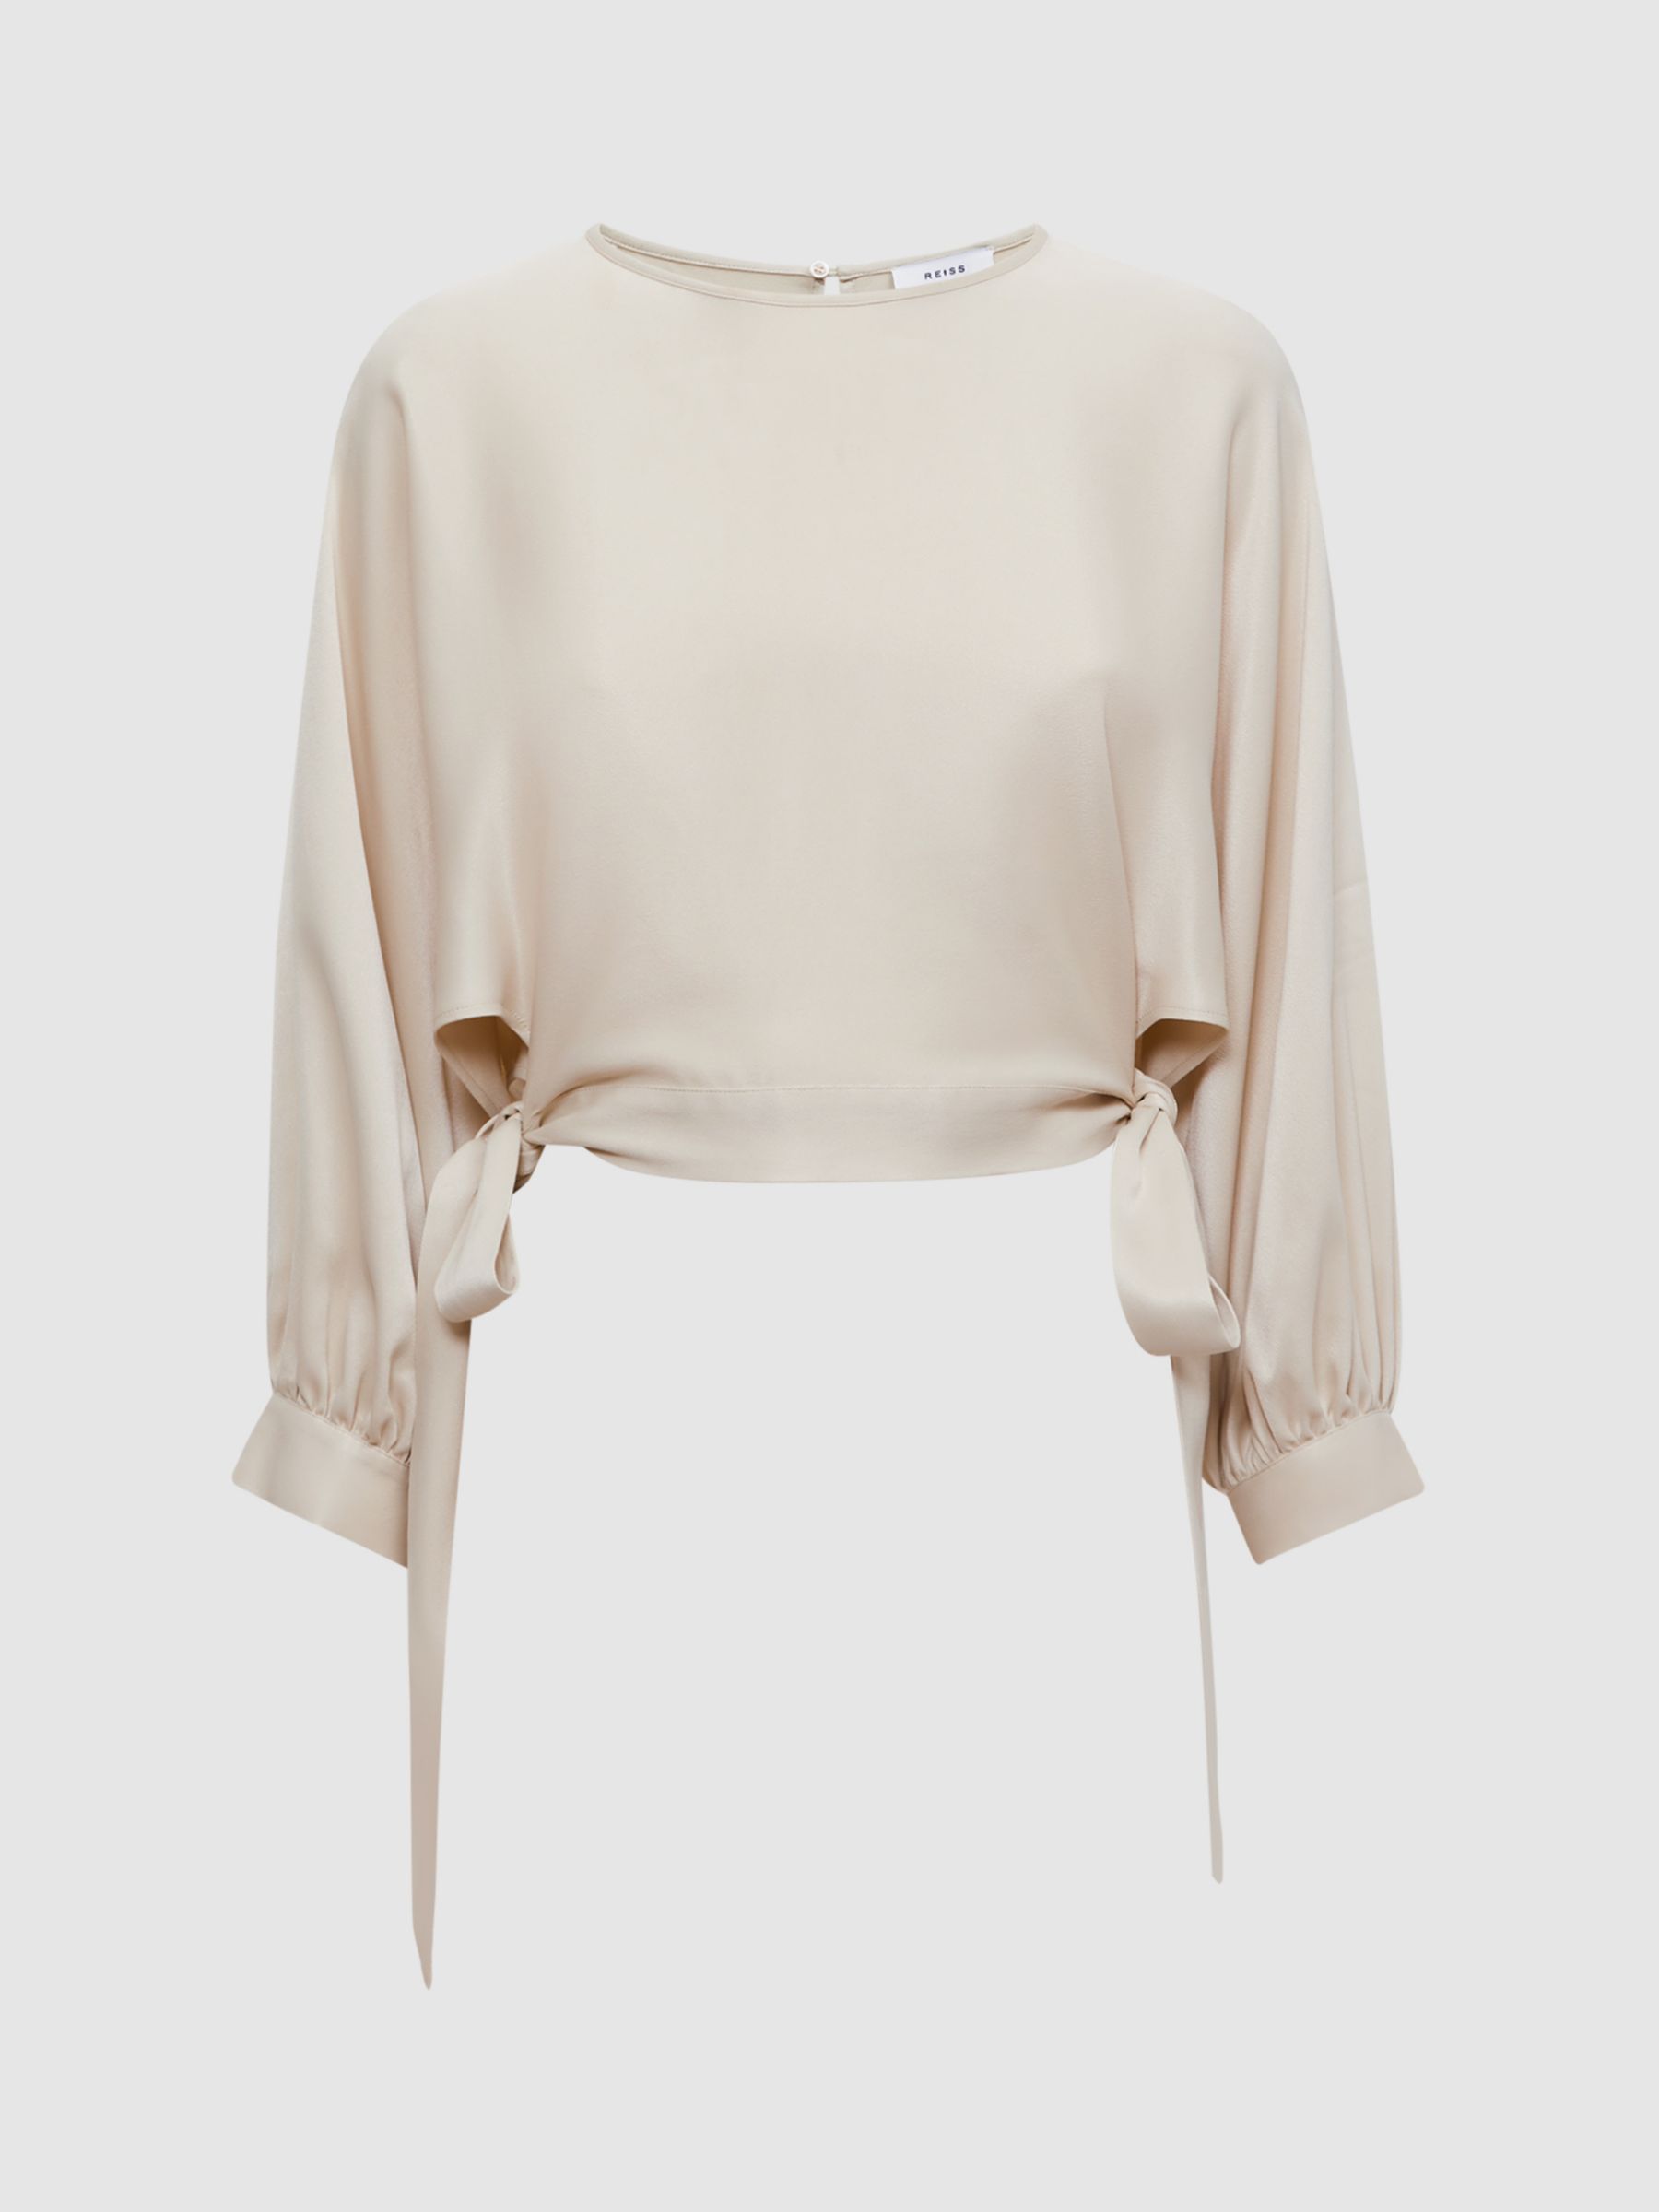 Reiss Imogen Cutout Tie Blouse, Champagne at John Lewis & Partners